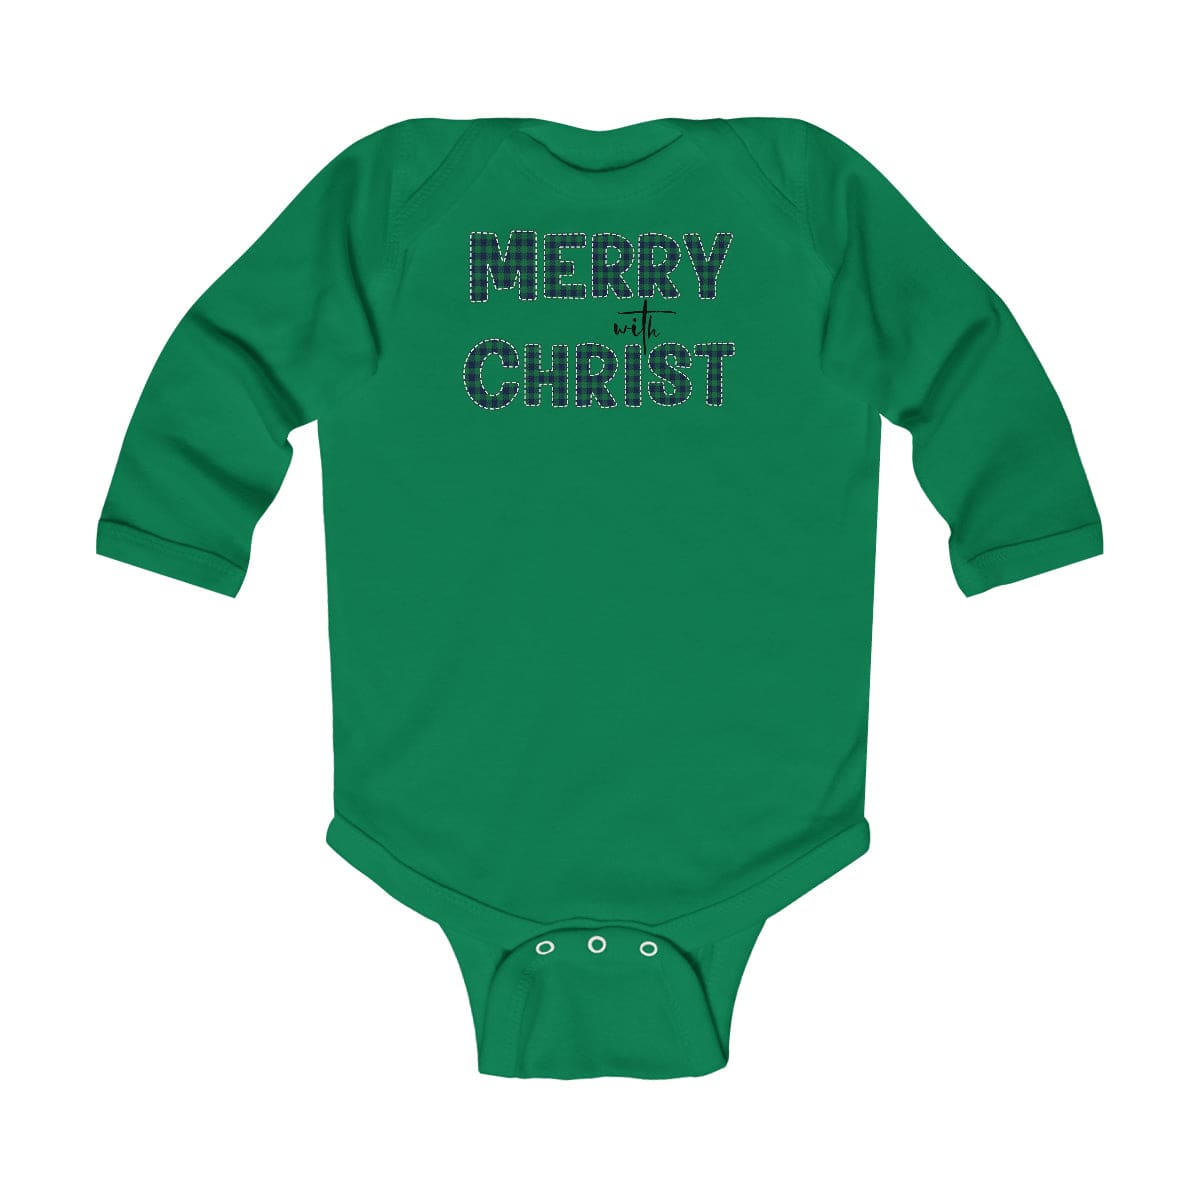 Infant Long Sleeve Bodysuit Merry With Christ Green Plaid Christmas Holiday